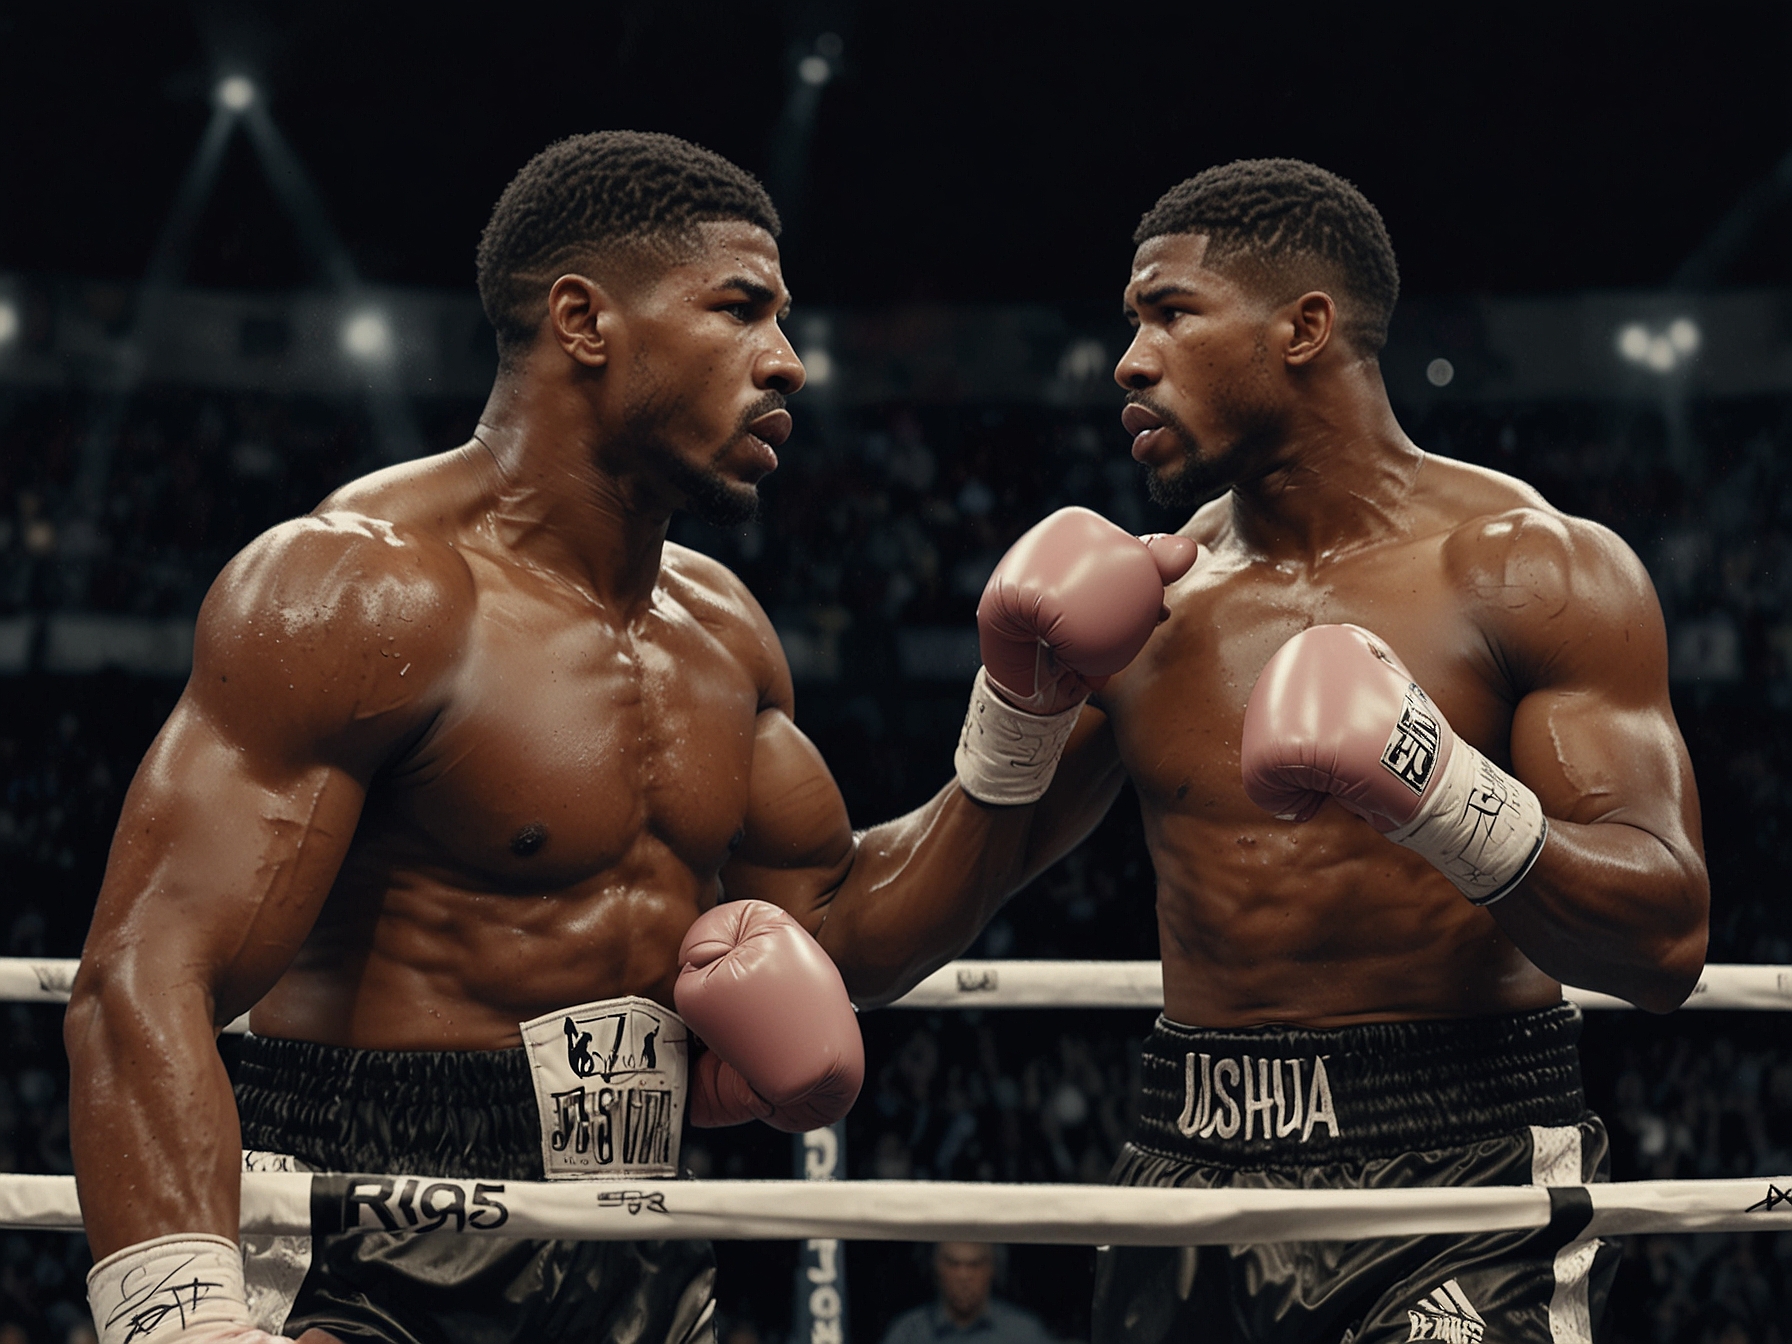 Close-up of Anthony Joshua confronting Daniel Dubois, capturing the moment he tells his rival, ‘don’t disrespect me,’ highlighting the personal and psychological intensity of their rivalry.